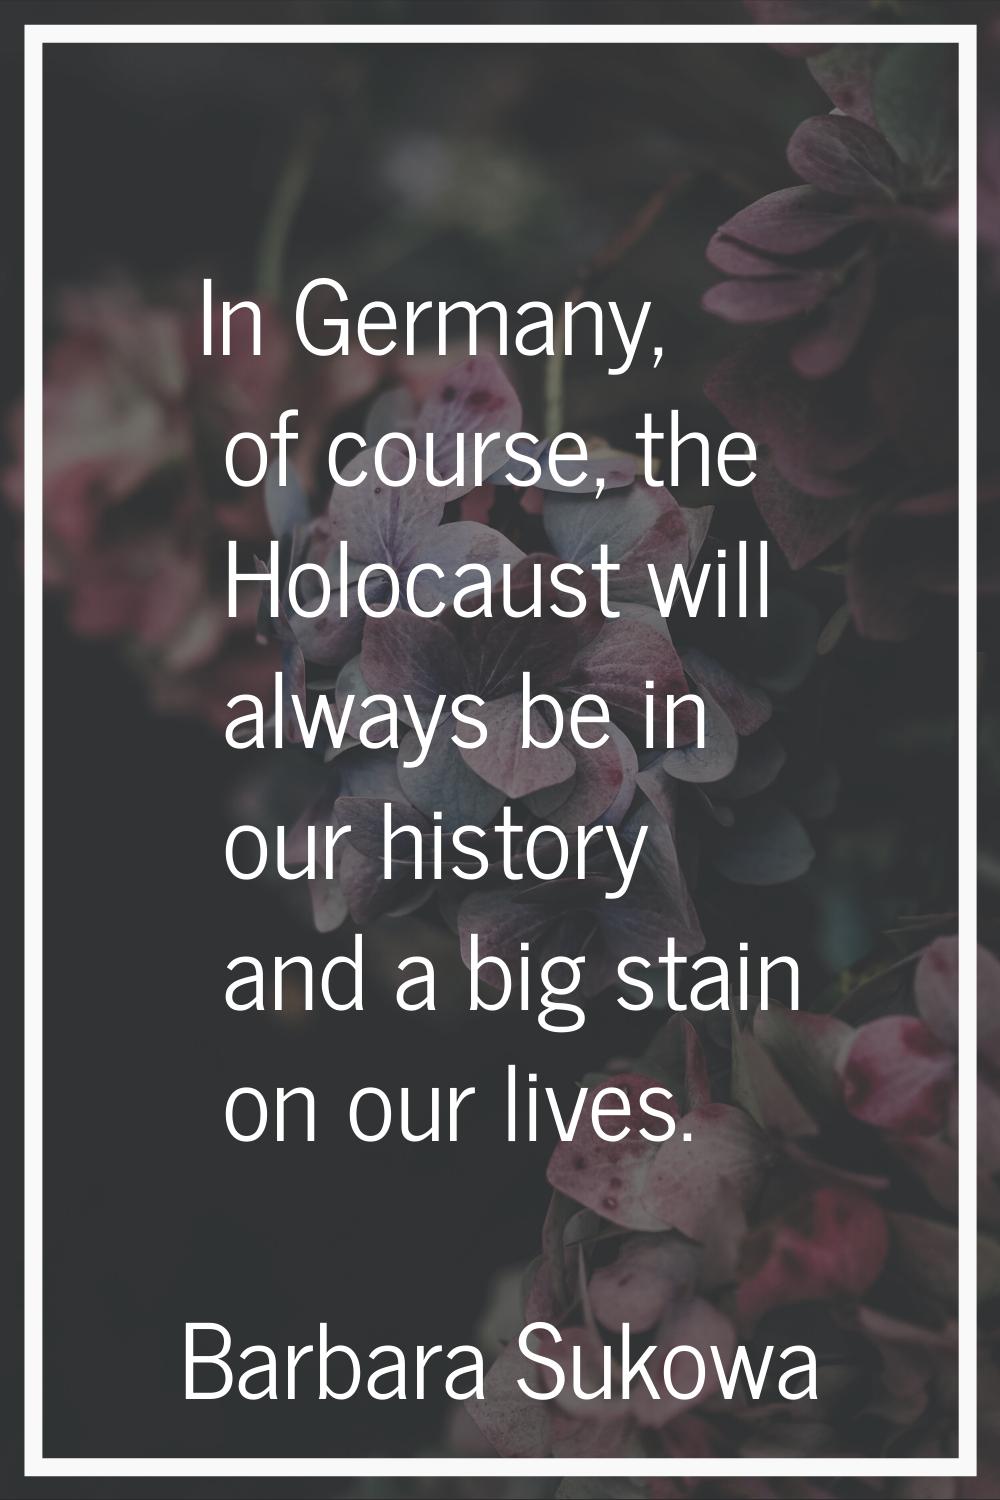 In Germany, of course, the Holocaust will always be in our history and a big stain on our lives.